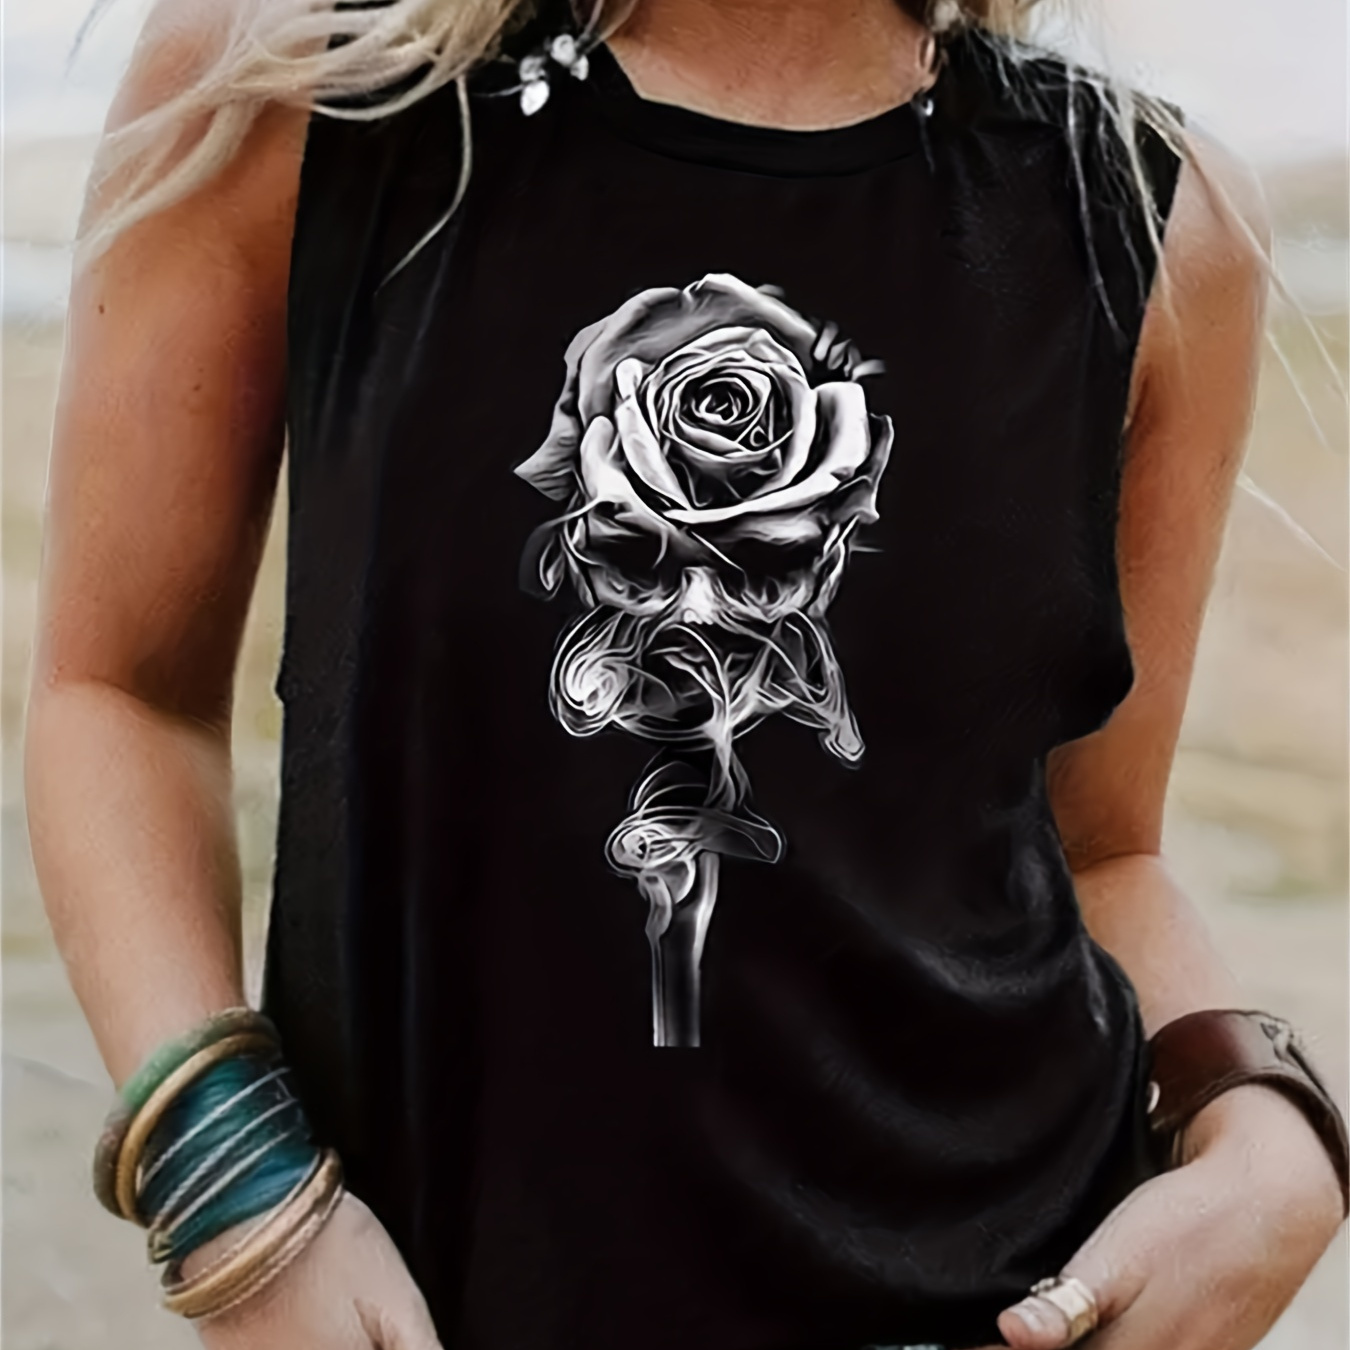 

Rose & Skull Print Tank Top, Sleeveless Crew Neck Tank Top, Casual Every Day Tops, Women's Clothing